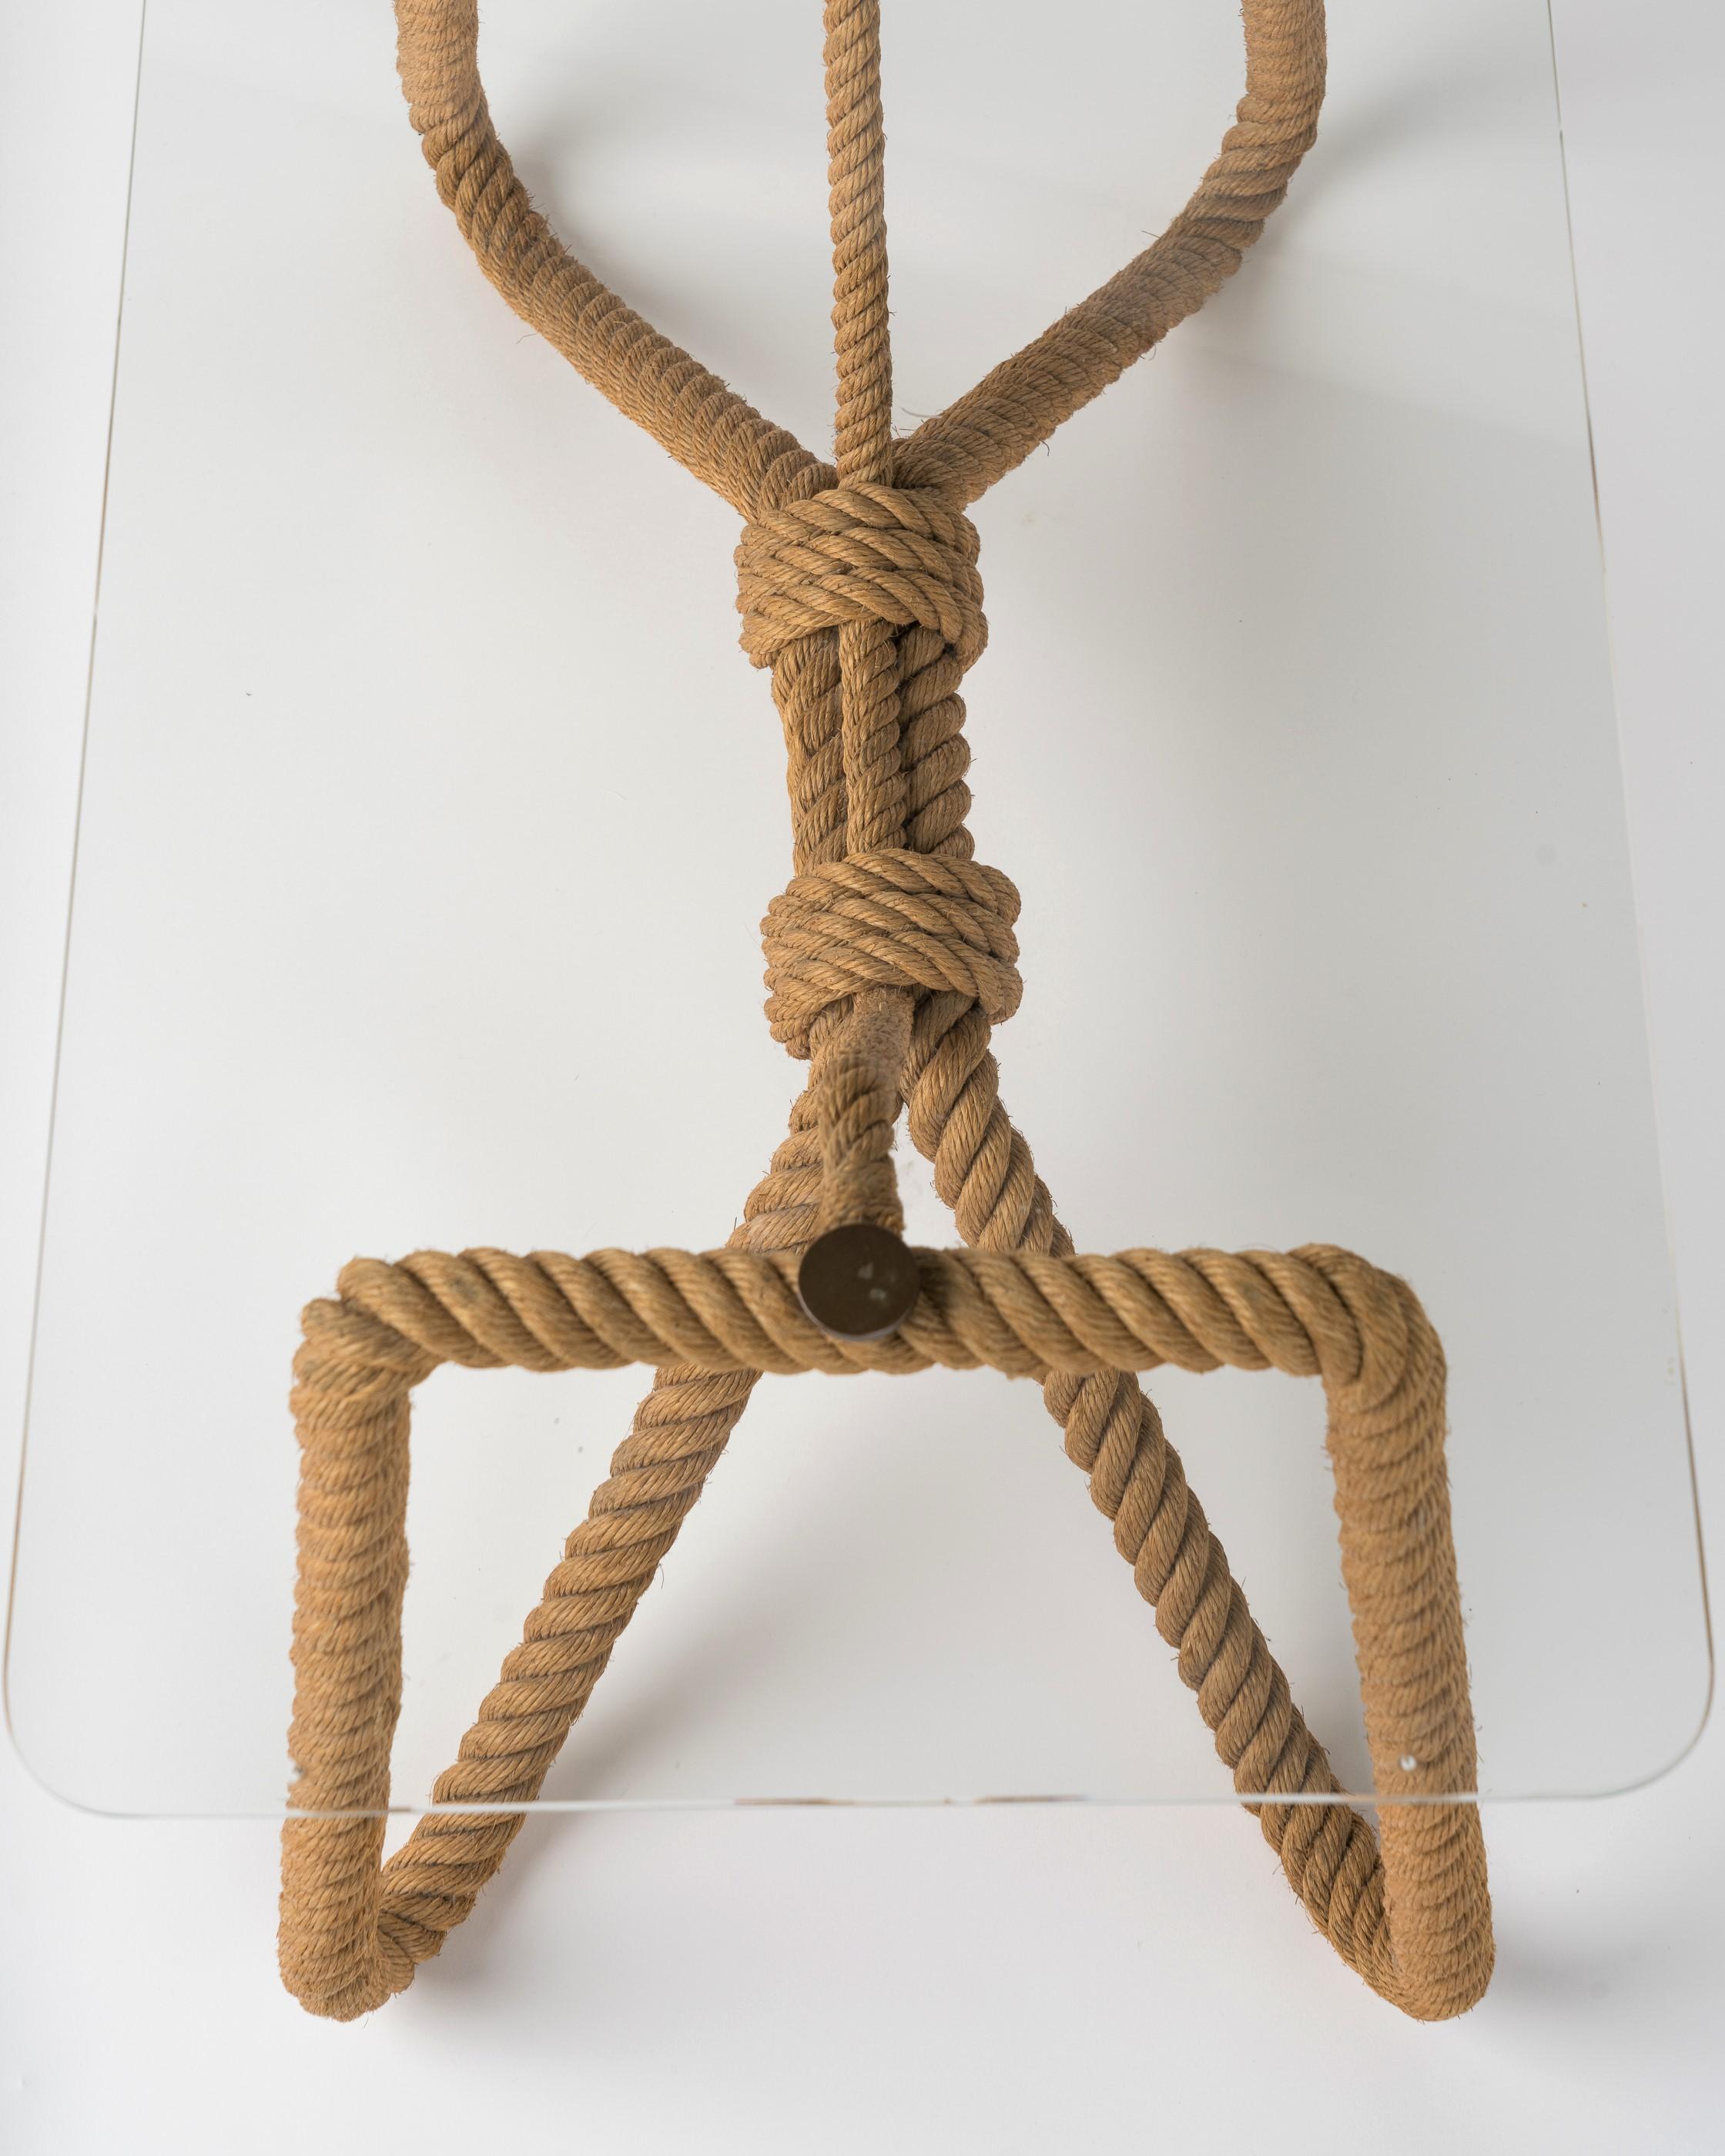 Mid-20th Century Rope Coffee Table by Adrien Audoux & Frida Minnet, France, 1960's